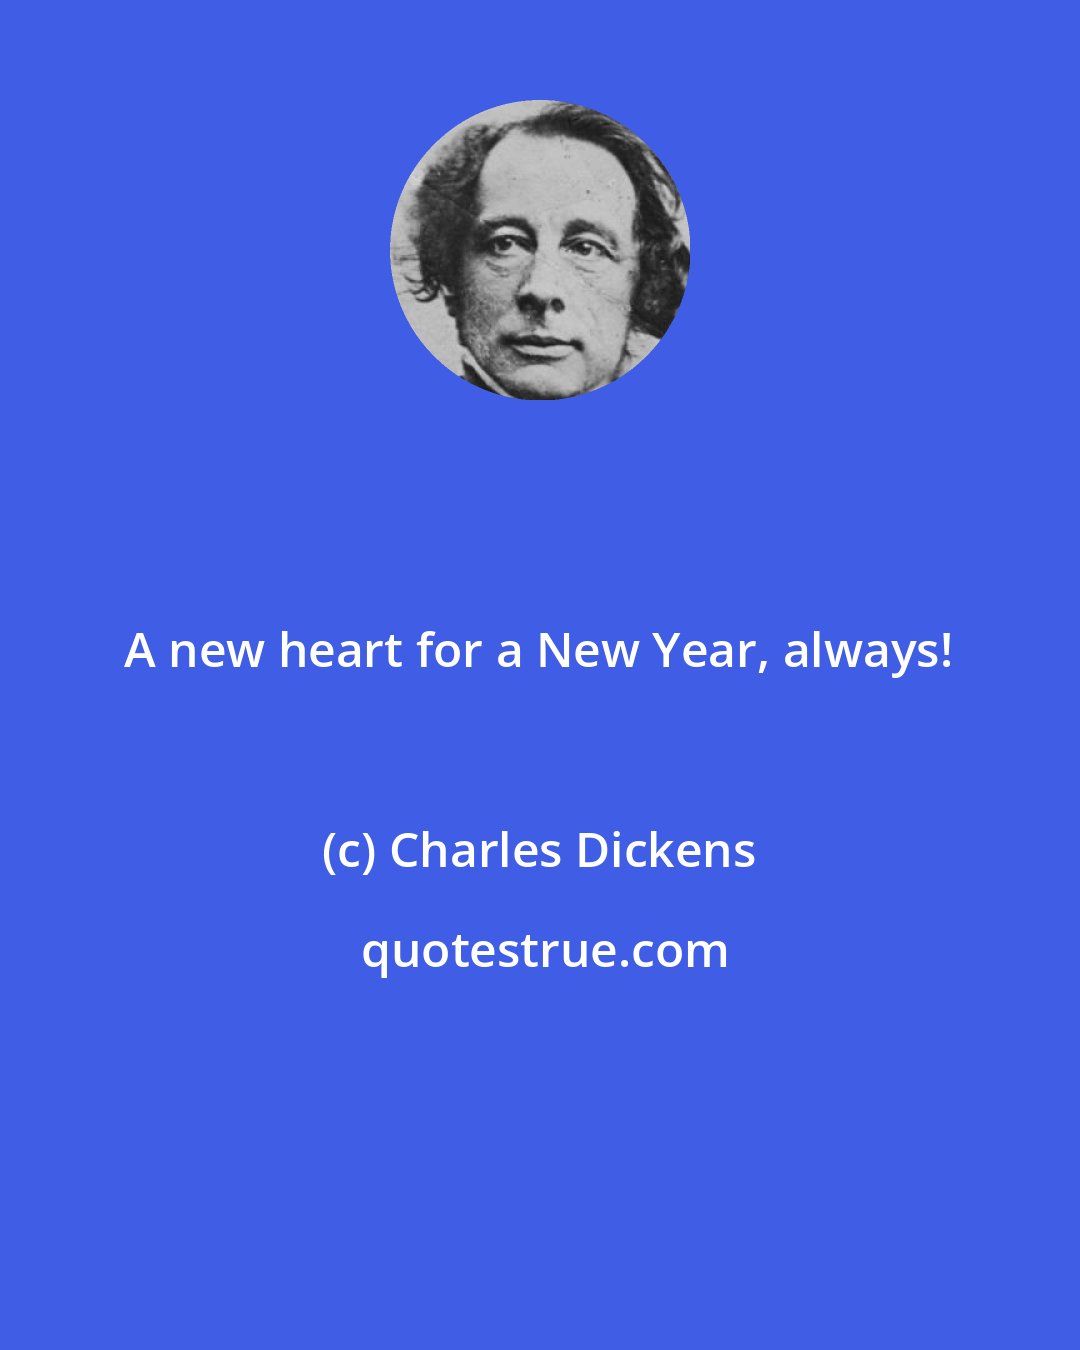 Charles Dickens: A new heart for a New Year, always!